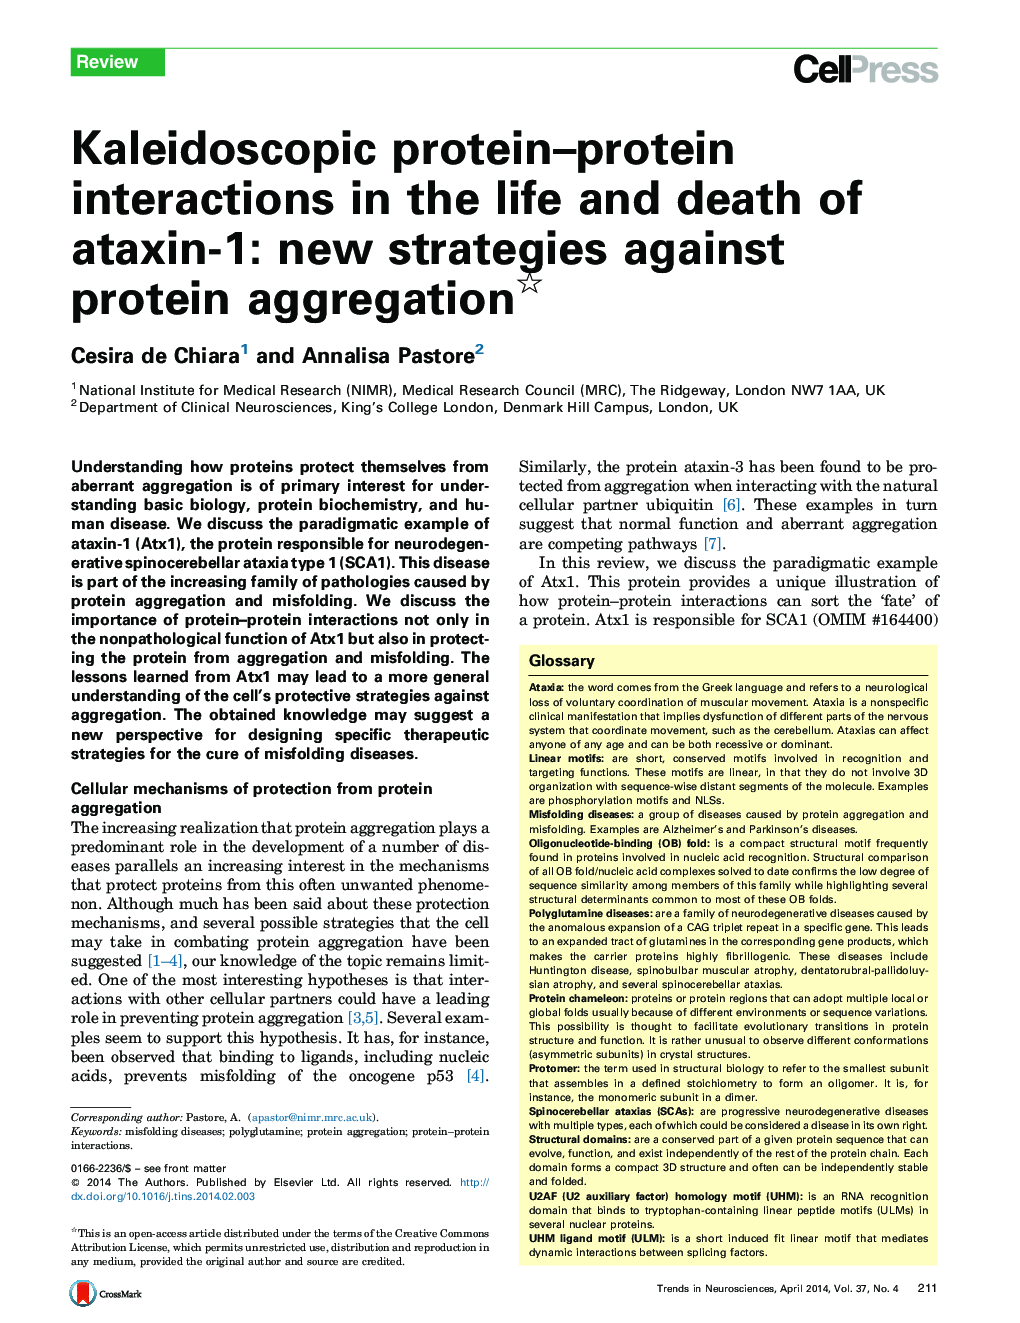 Kaleidoscopic protein-protein interactions in the life and death of ataxin-1: new strategies against protein aggregation